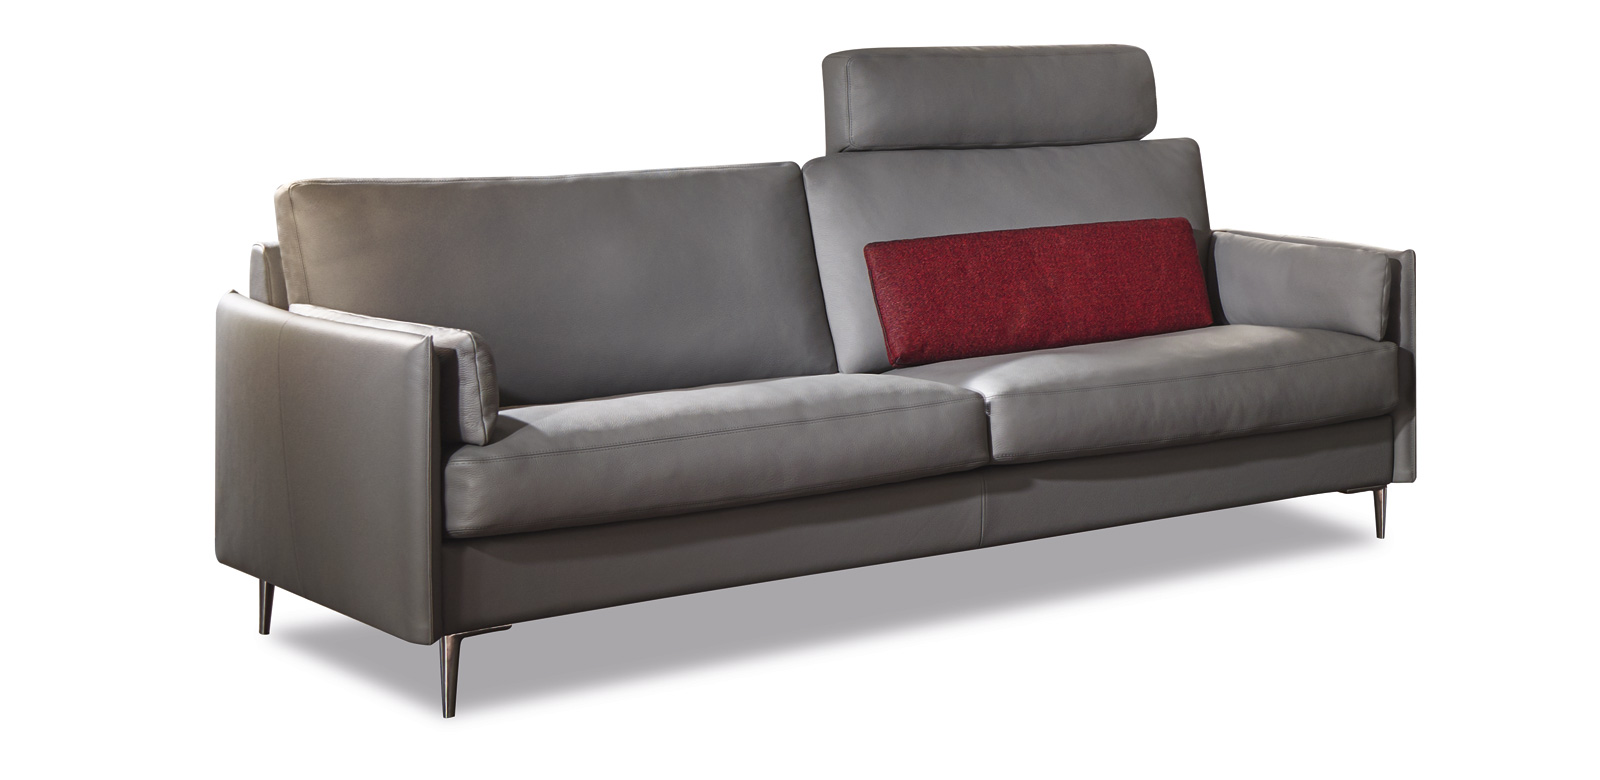 CL820 2-seater with headrests, in grey leather and with red cushions